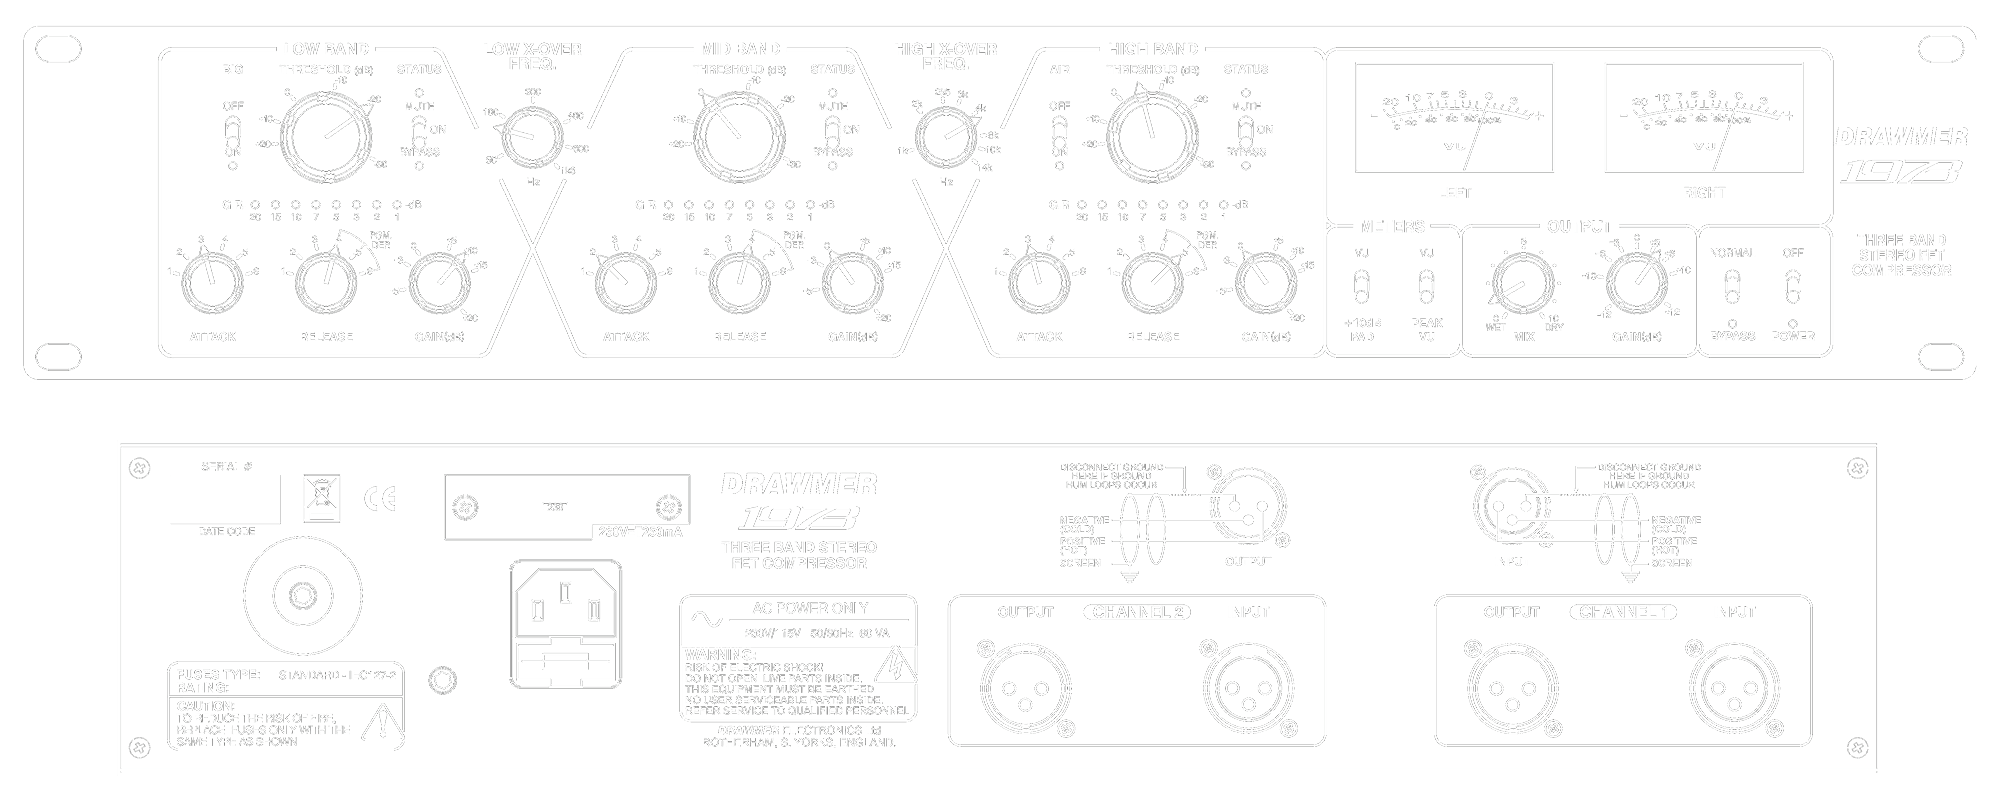 A line drawing of the front and rear panels of the 1973 showing controls and connectors